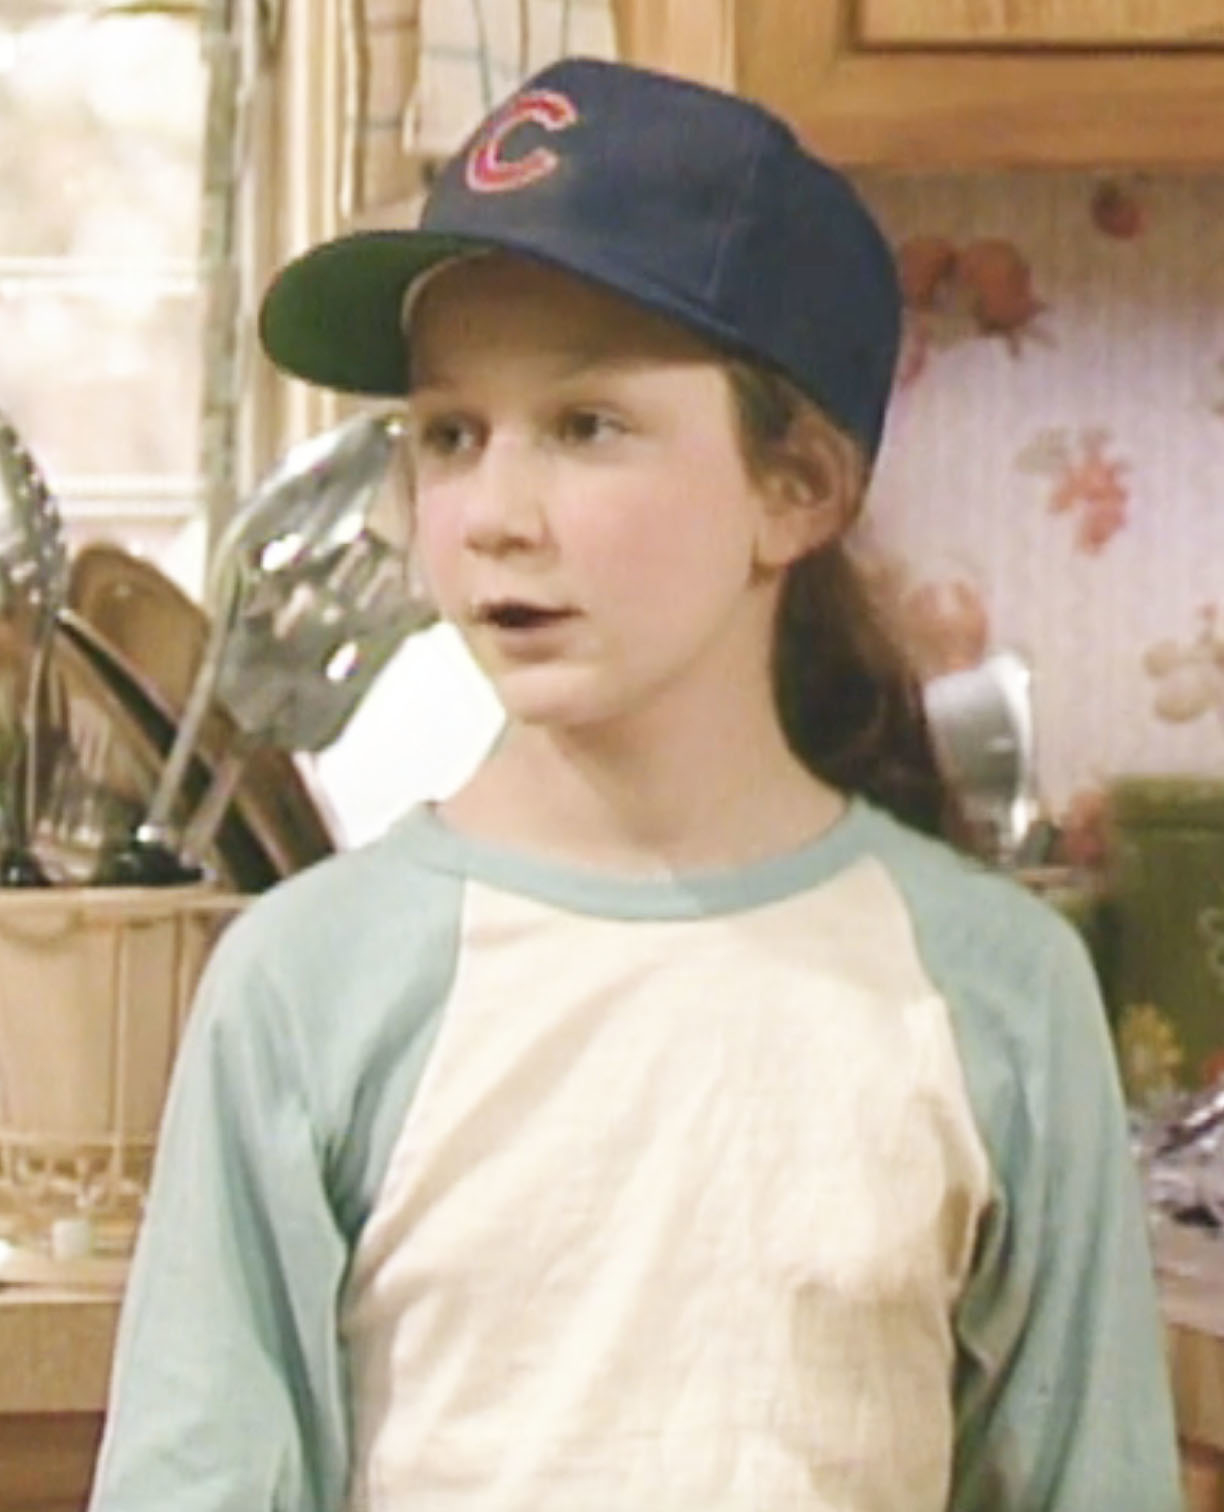 young character wearing a baseball hat